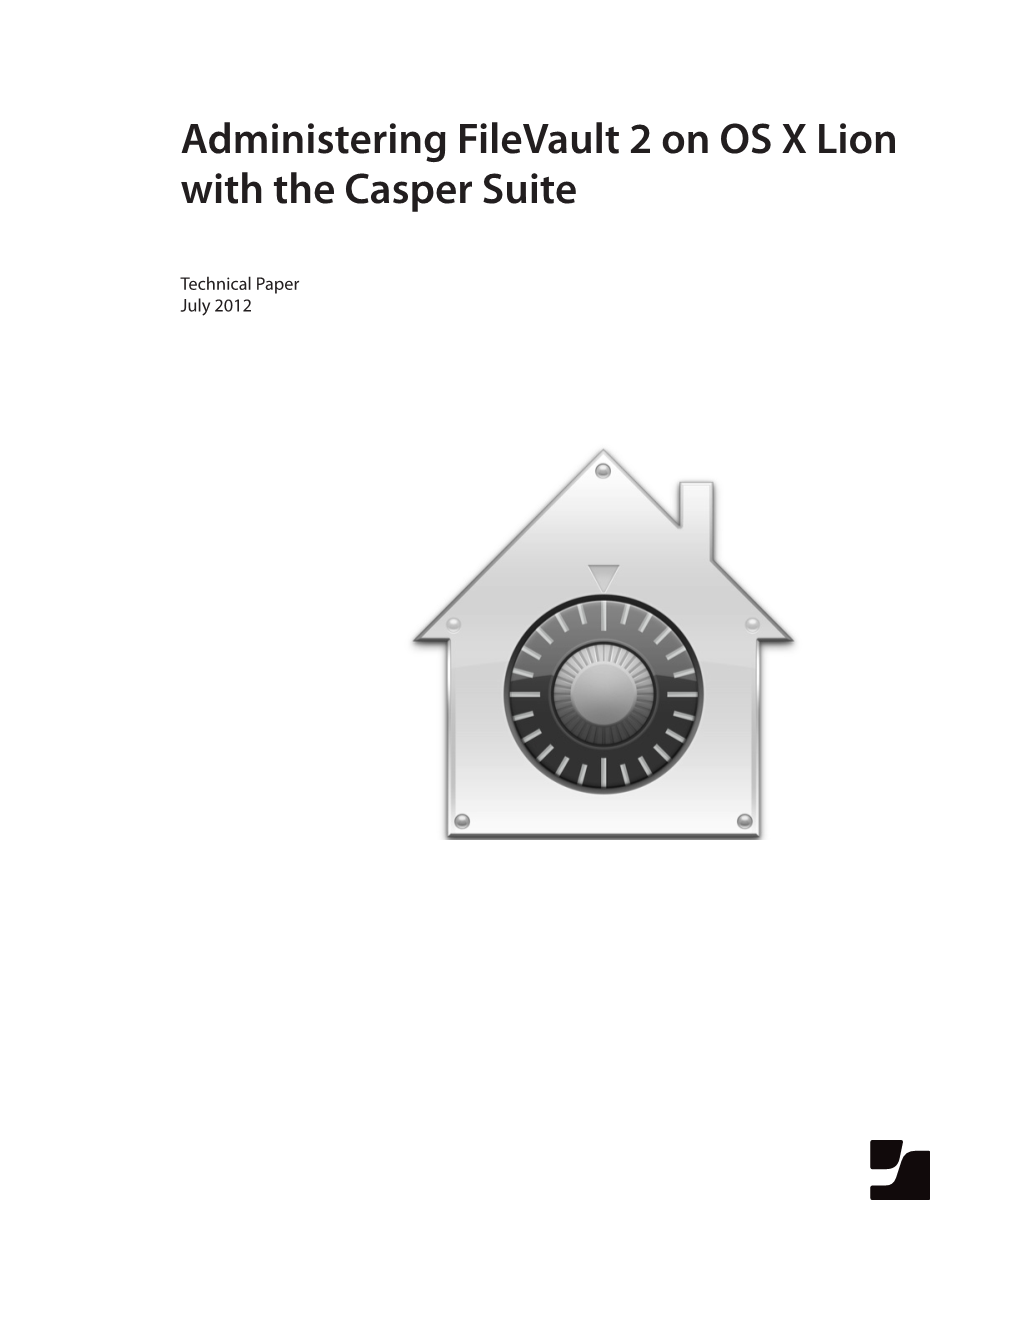 Administering Filevault 2 on OS X Lion with the Casper Suite